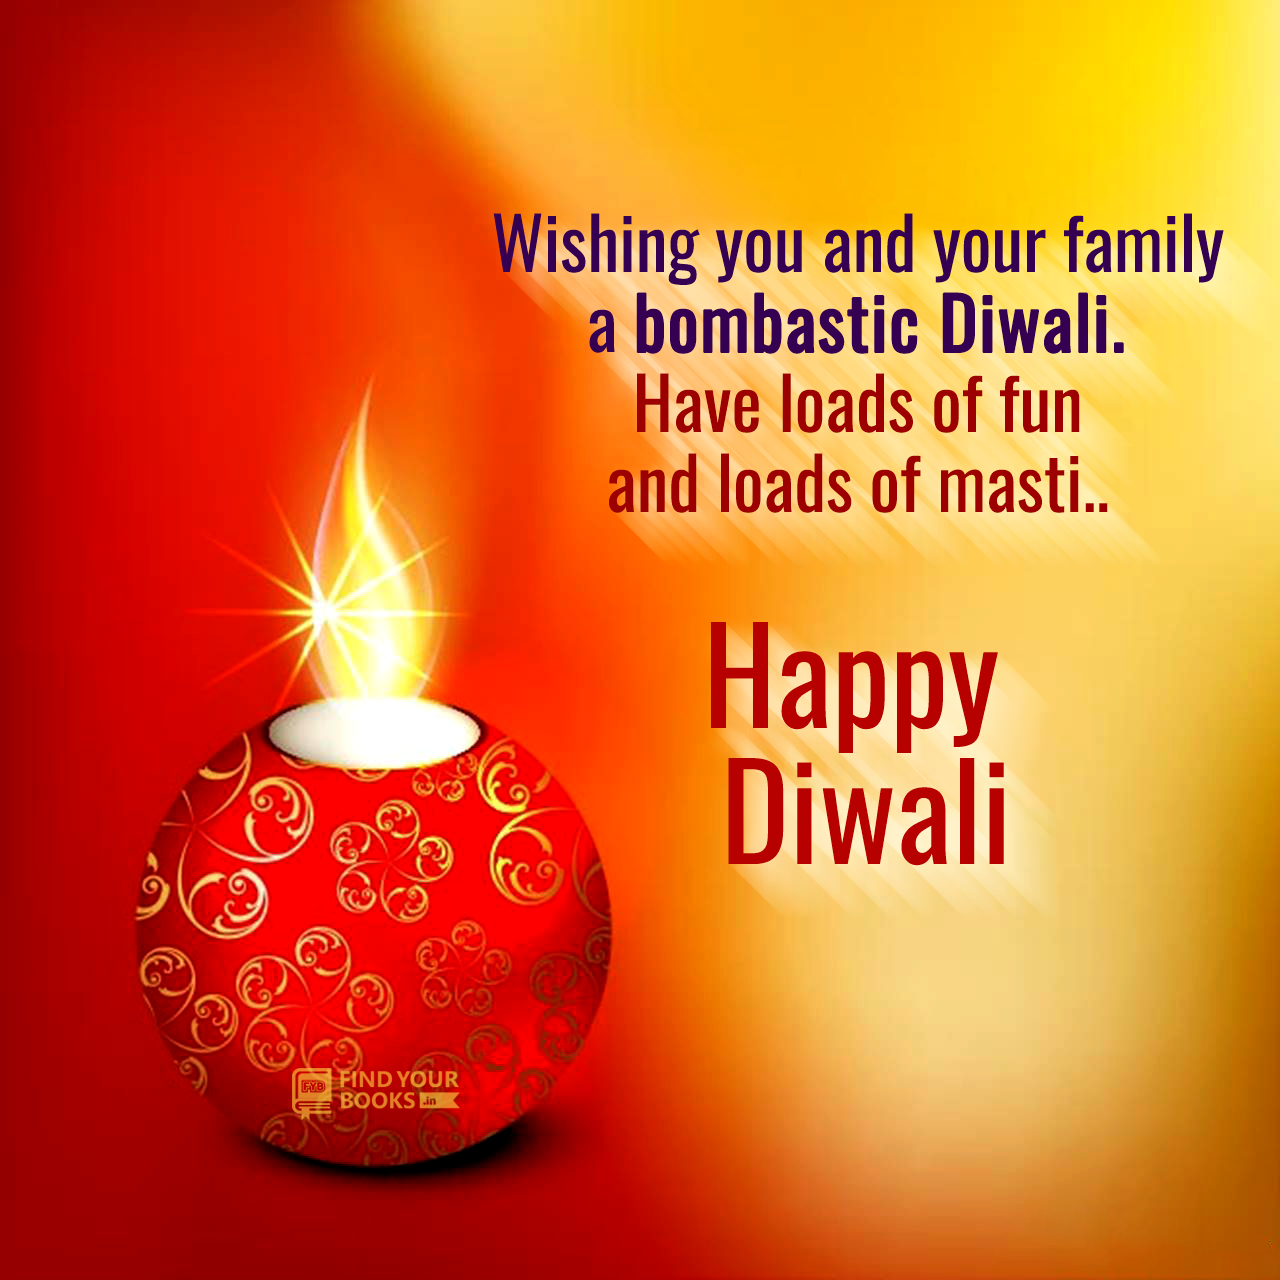 Beautiful Diwali Greeting cards & wishes Design and Happy Diwali Wishes